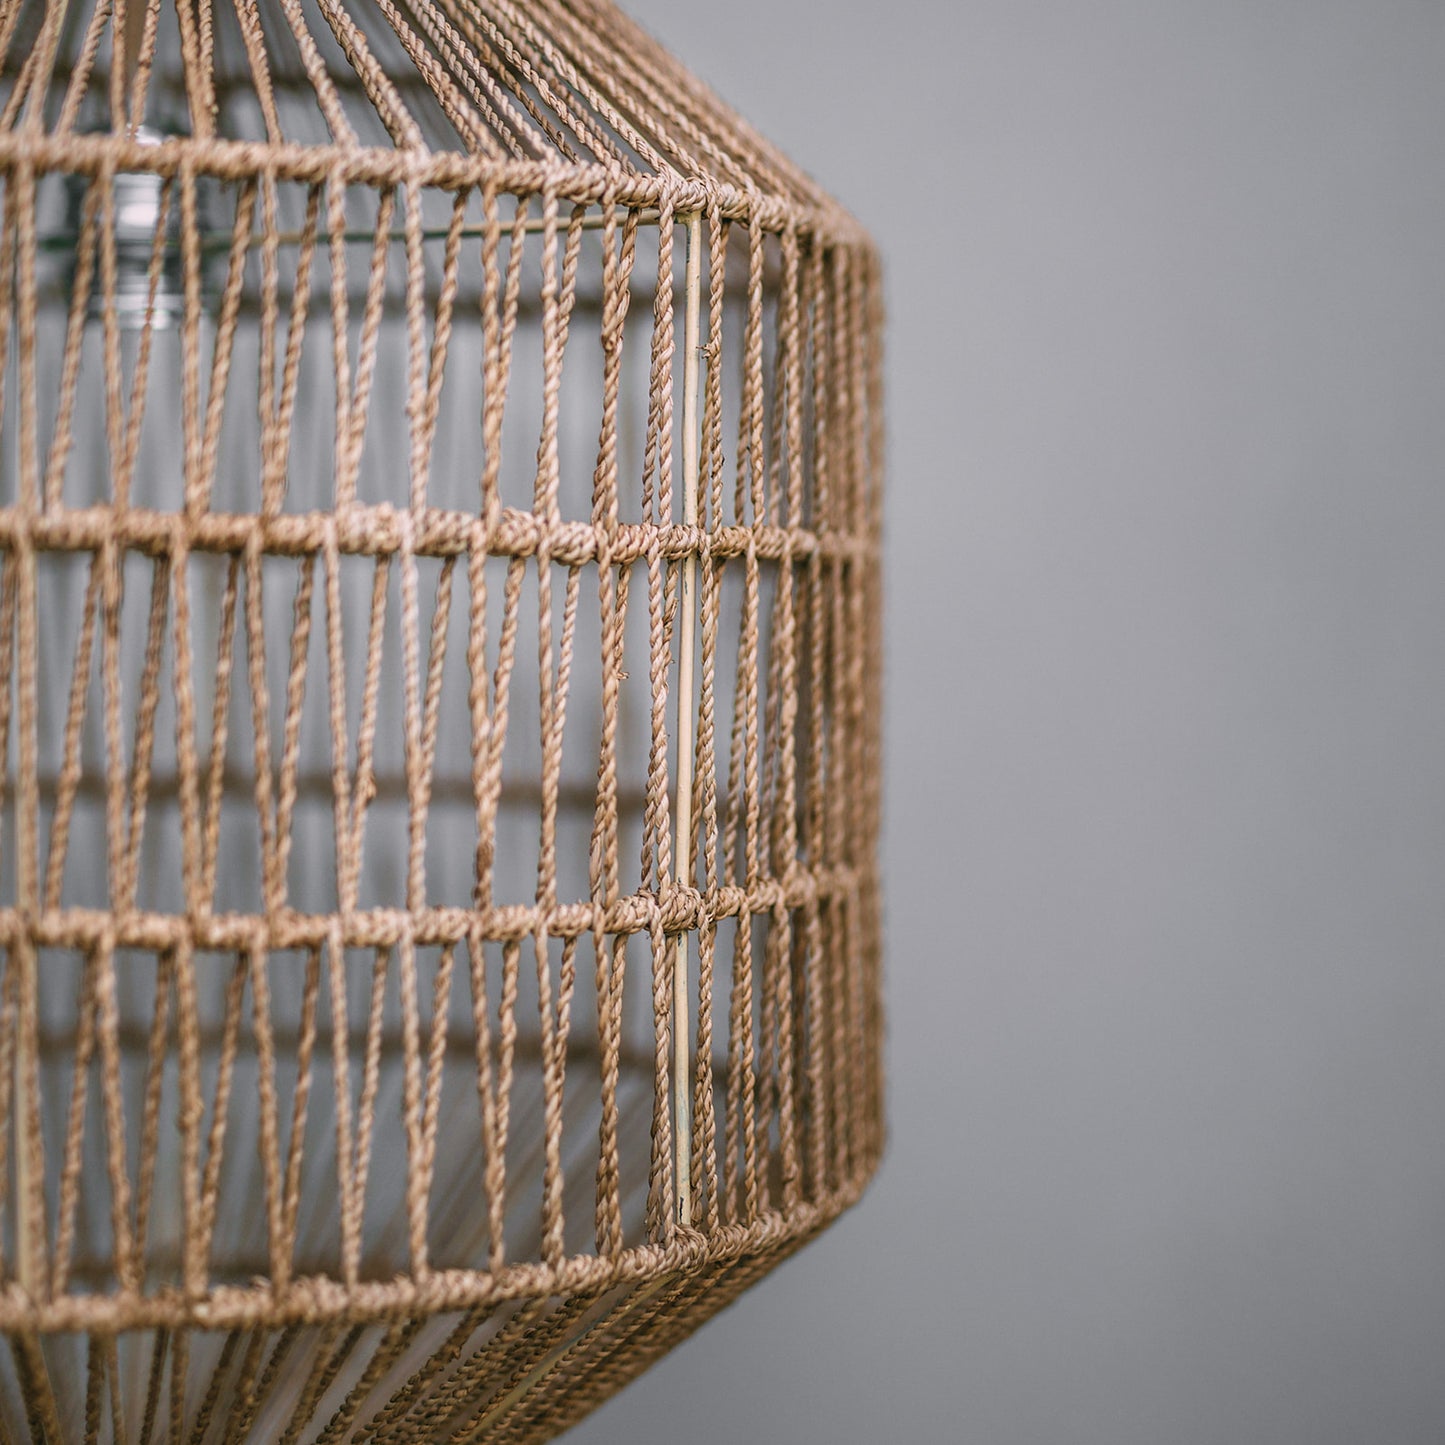 Seagrass pendant light shade. close up photograph showing the weave of the seagrass against a grey background.